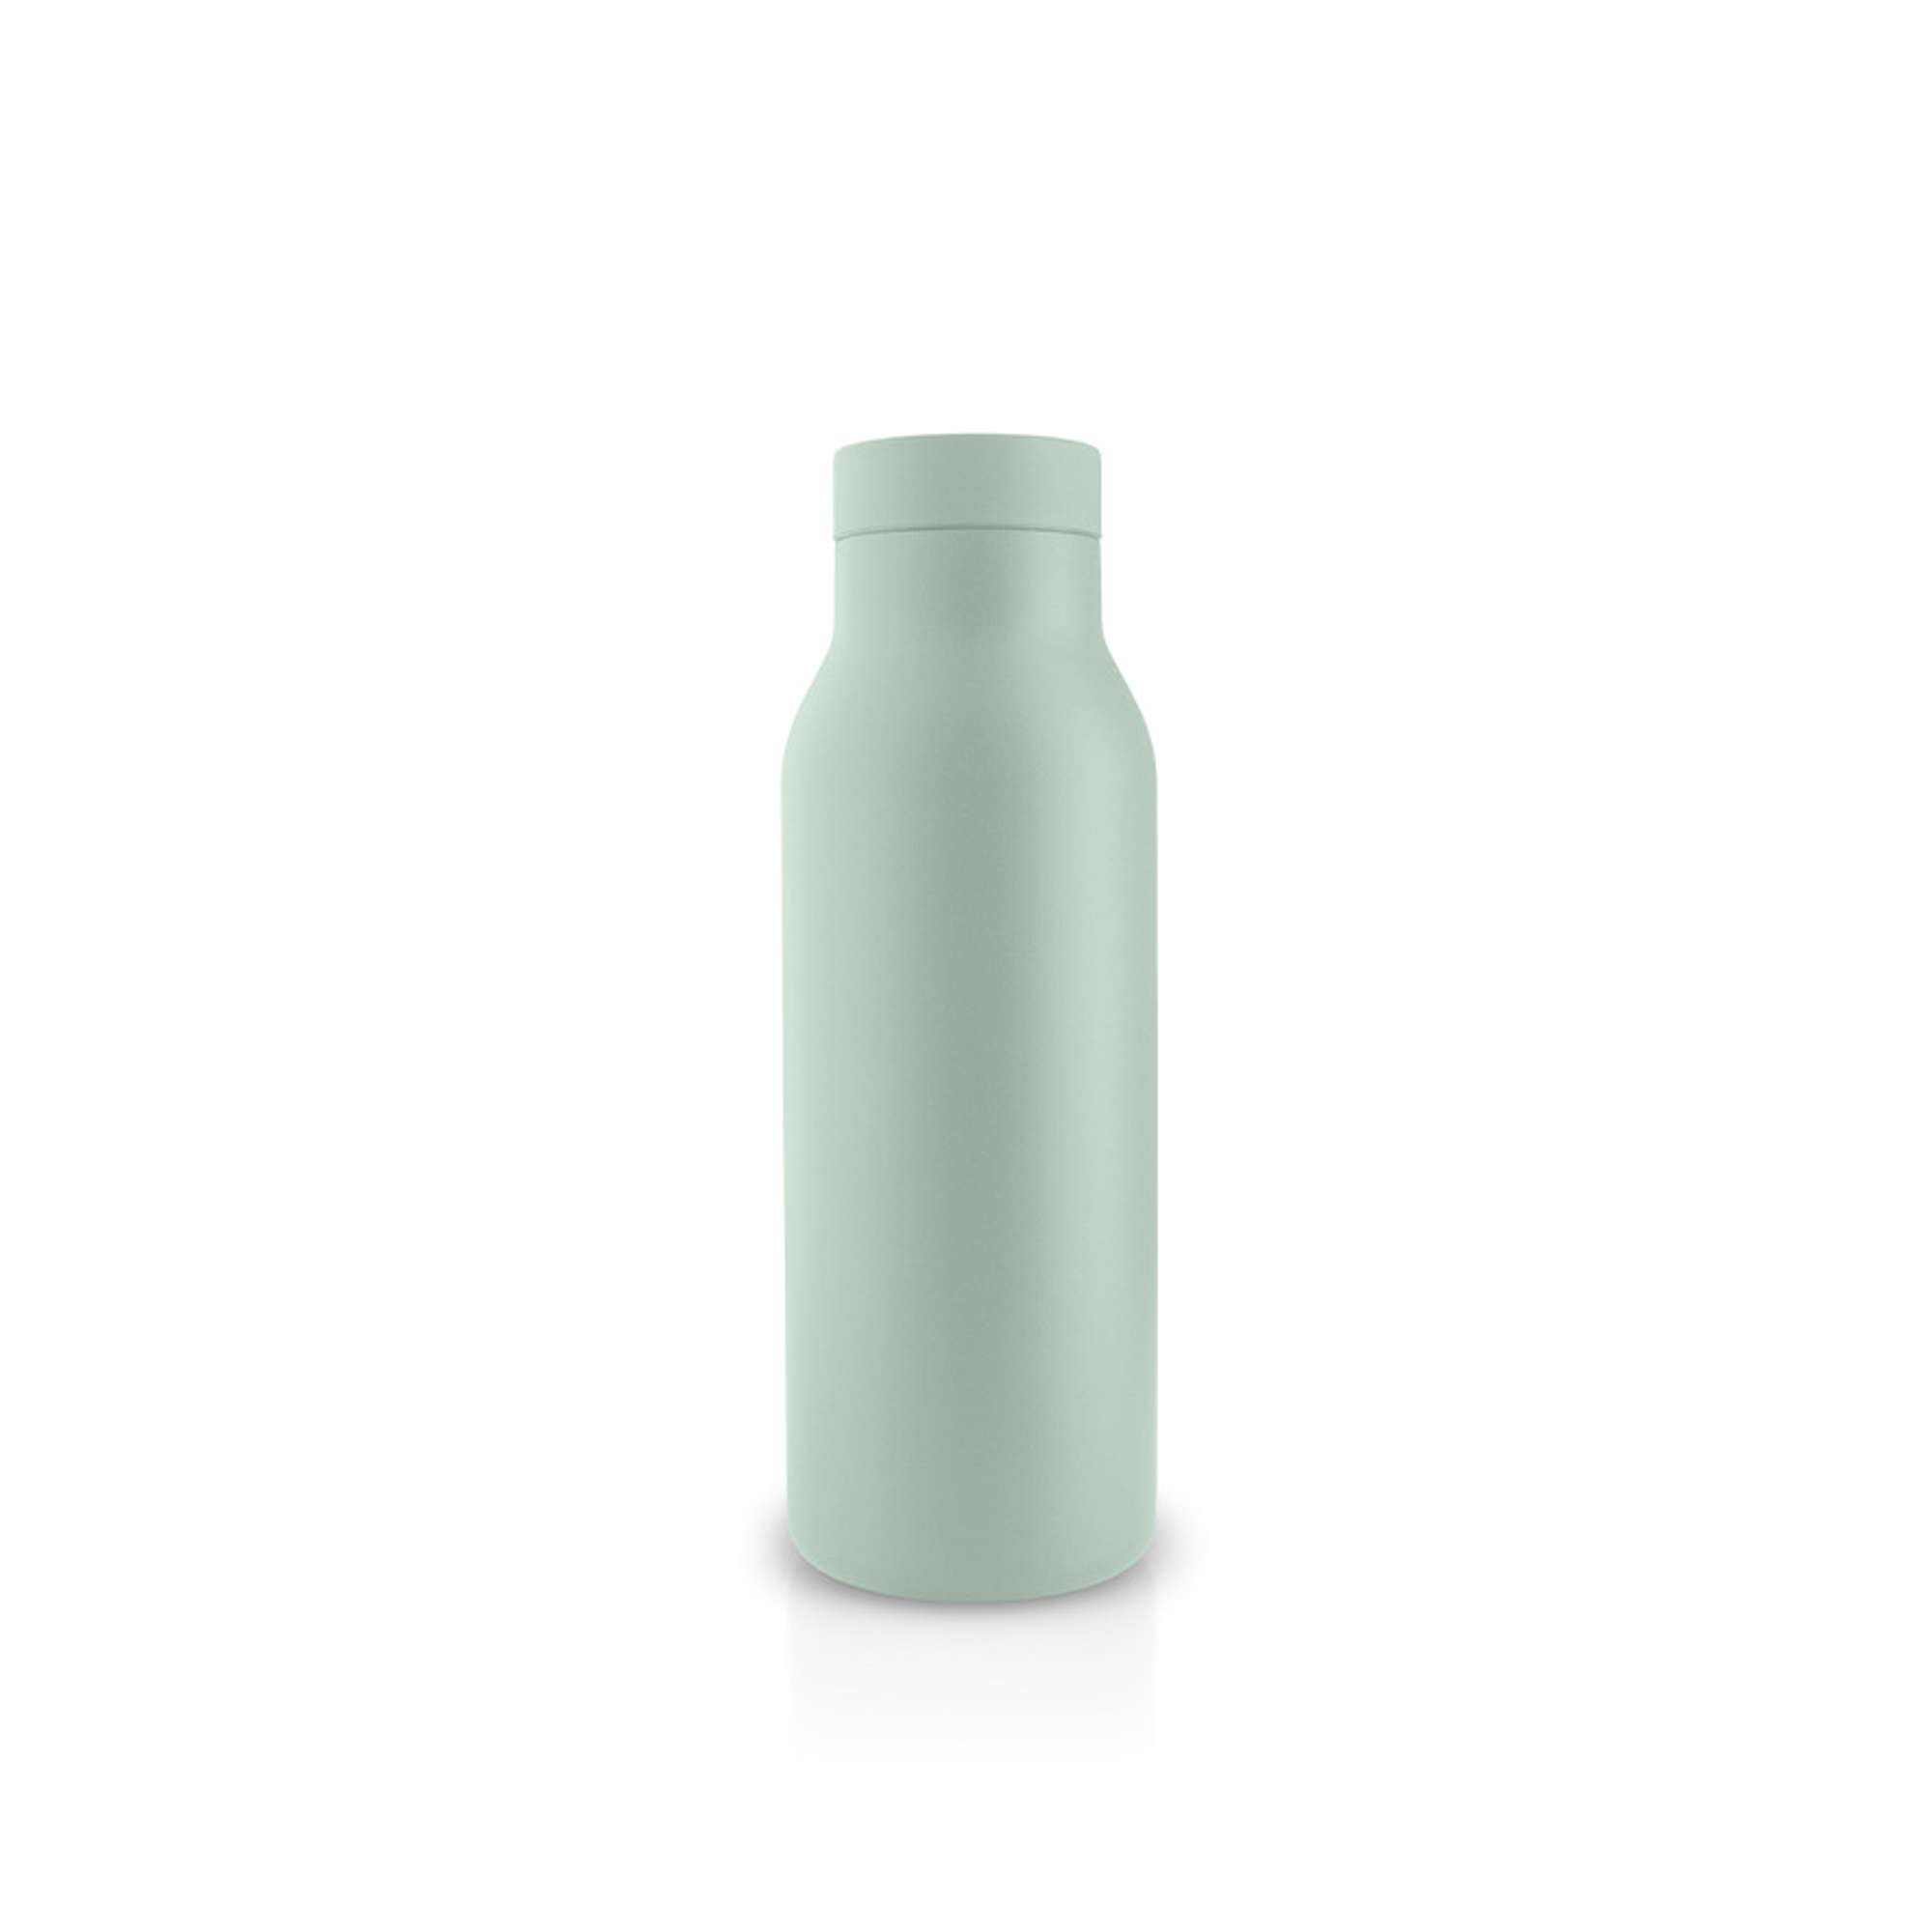 Urban thermo flask - 0.5 litres - Sage